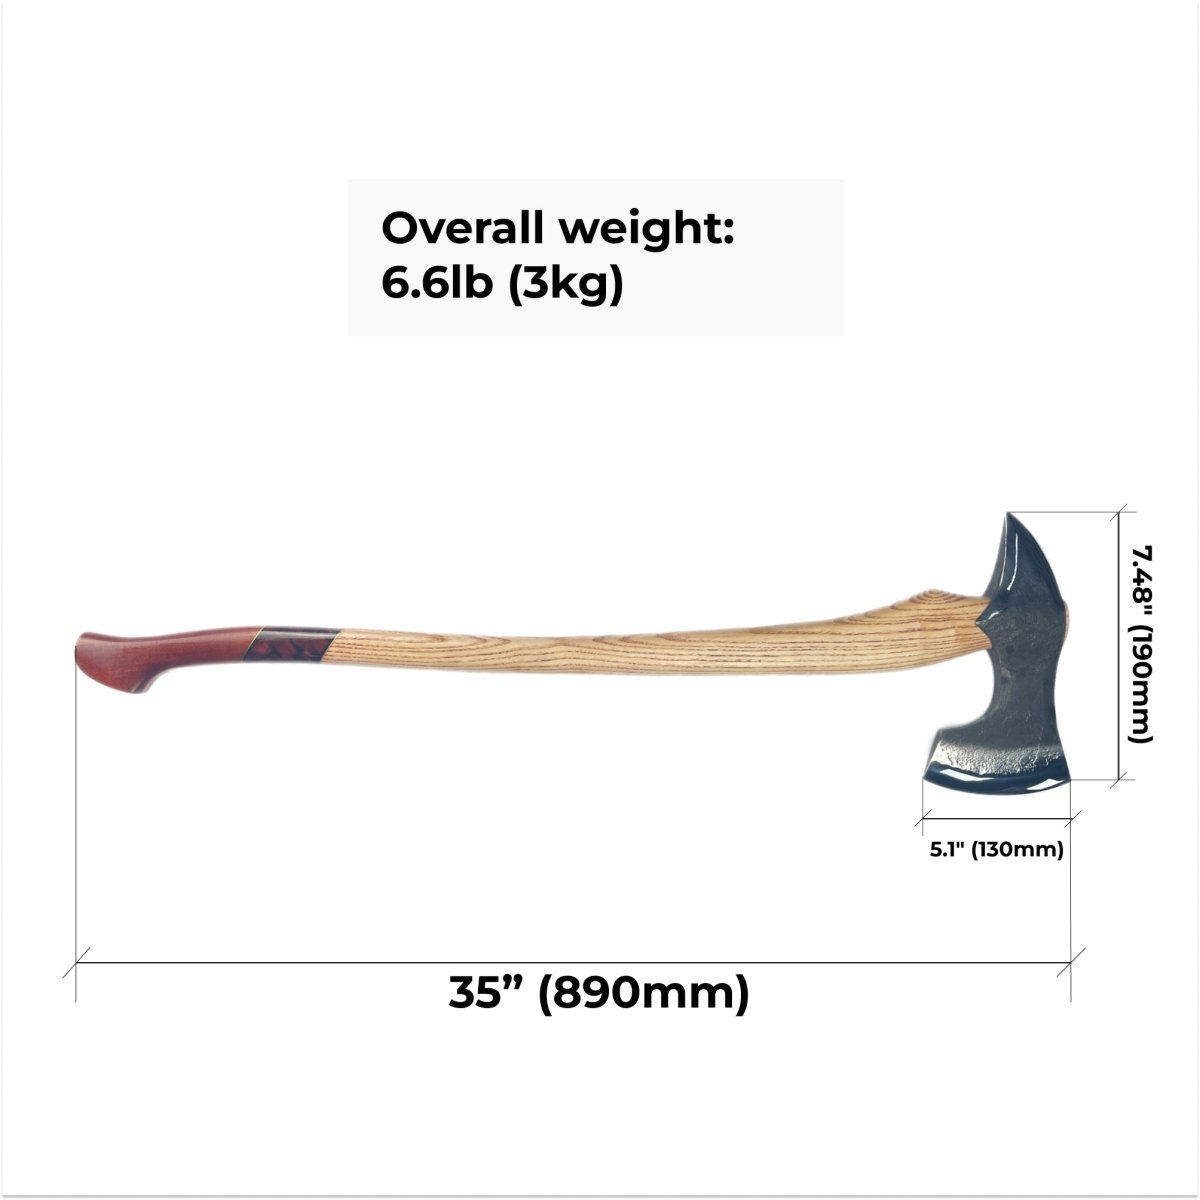 Double bit axe "Guthrum Old"(Functional version) from AncientSmithy